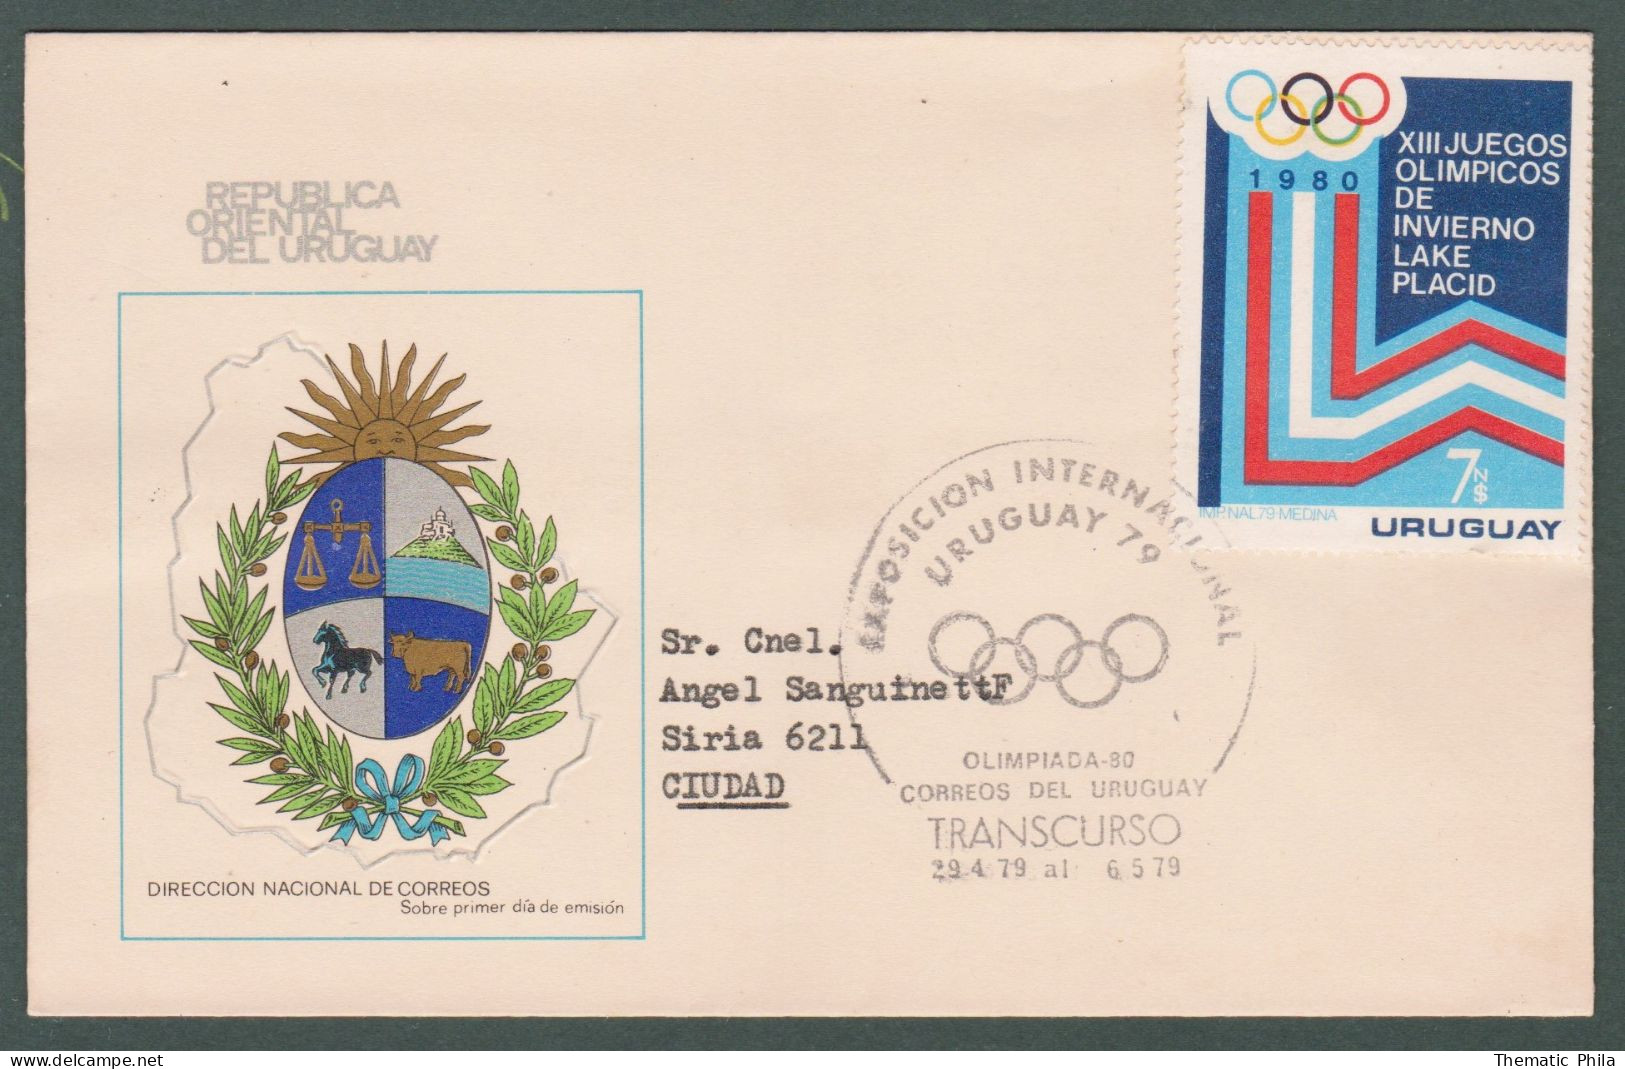 1979 URUGUAY Special Postmark Transcurso Expo International Olympic Games -Comité International Olympique - Invierno 1980: Lake Placid